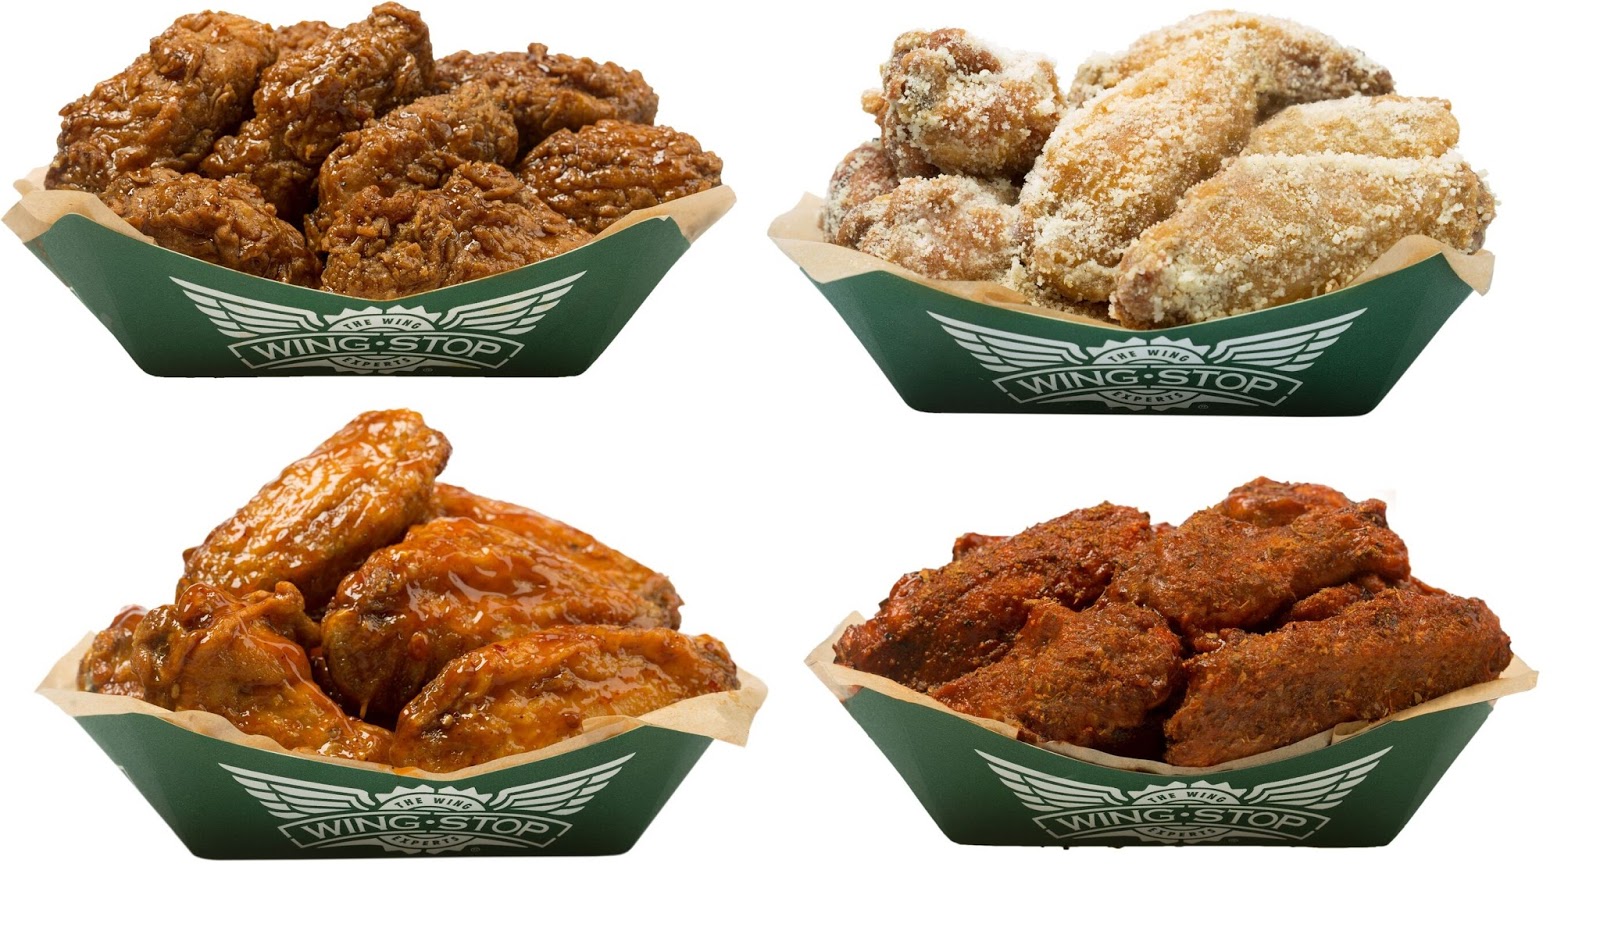 Wingstop Launches CantStopTheCrave Menu for Cravings that Just Won't